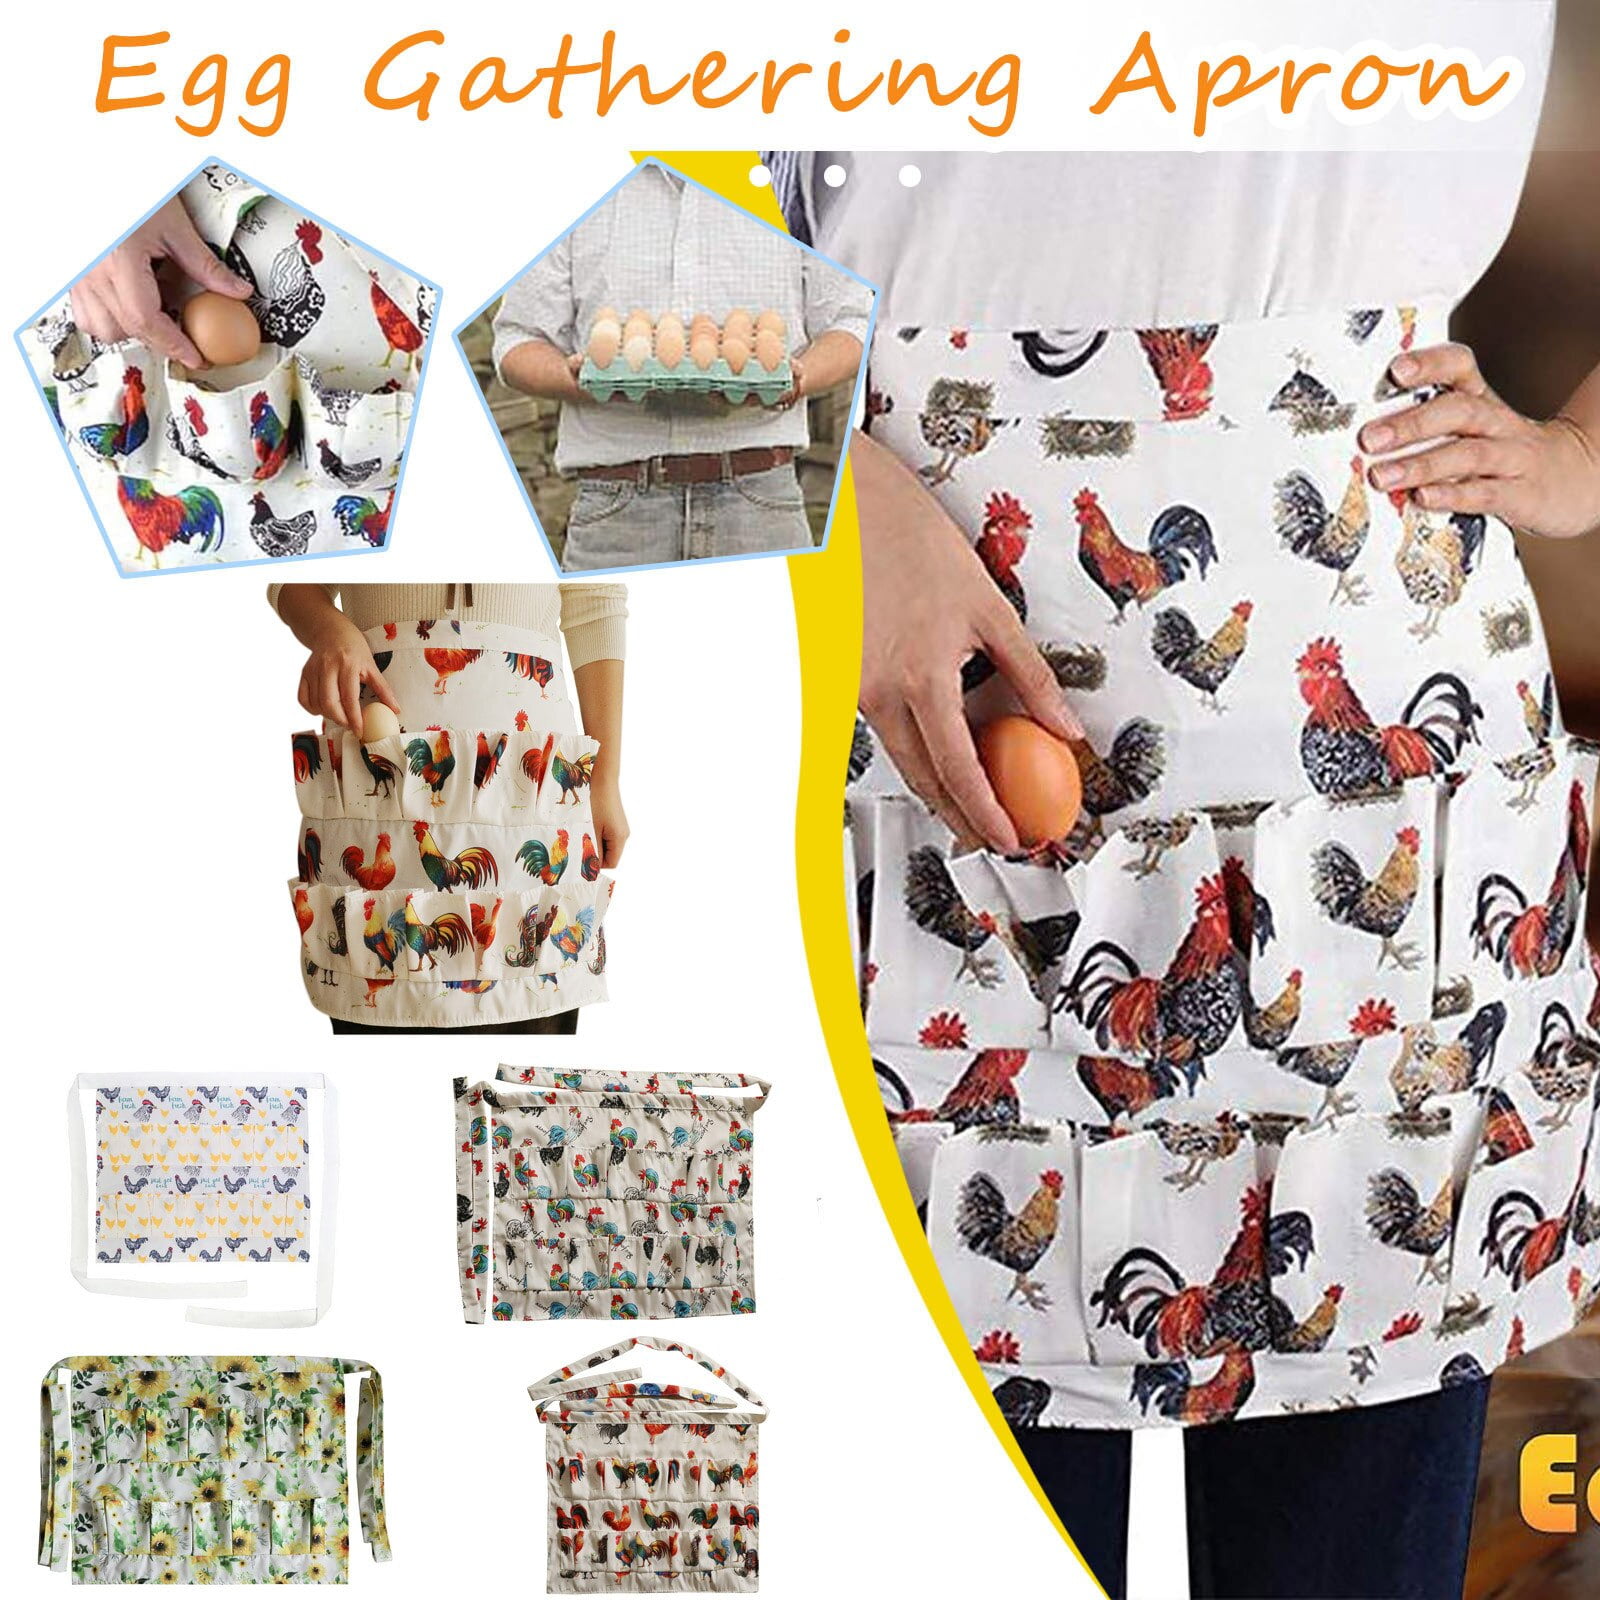  Chicken Egg Collecting Apron - Egg Gathering Aprons for Little  Kids - Child Egg Apron Fresh Eggs with Sturdy Pocket for Chicken Coop -  Holds 3-12 Eggs, Animal Design for Boys